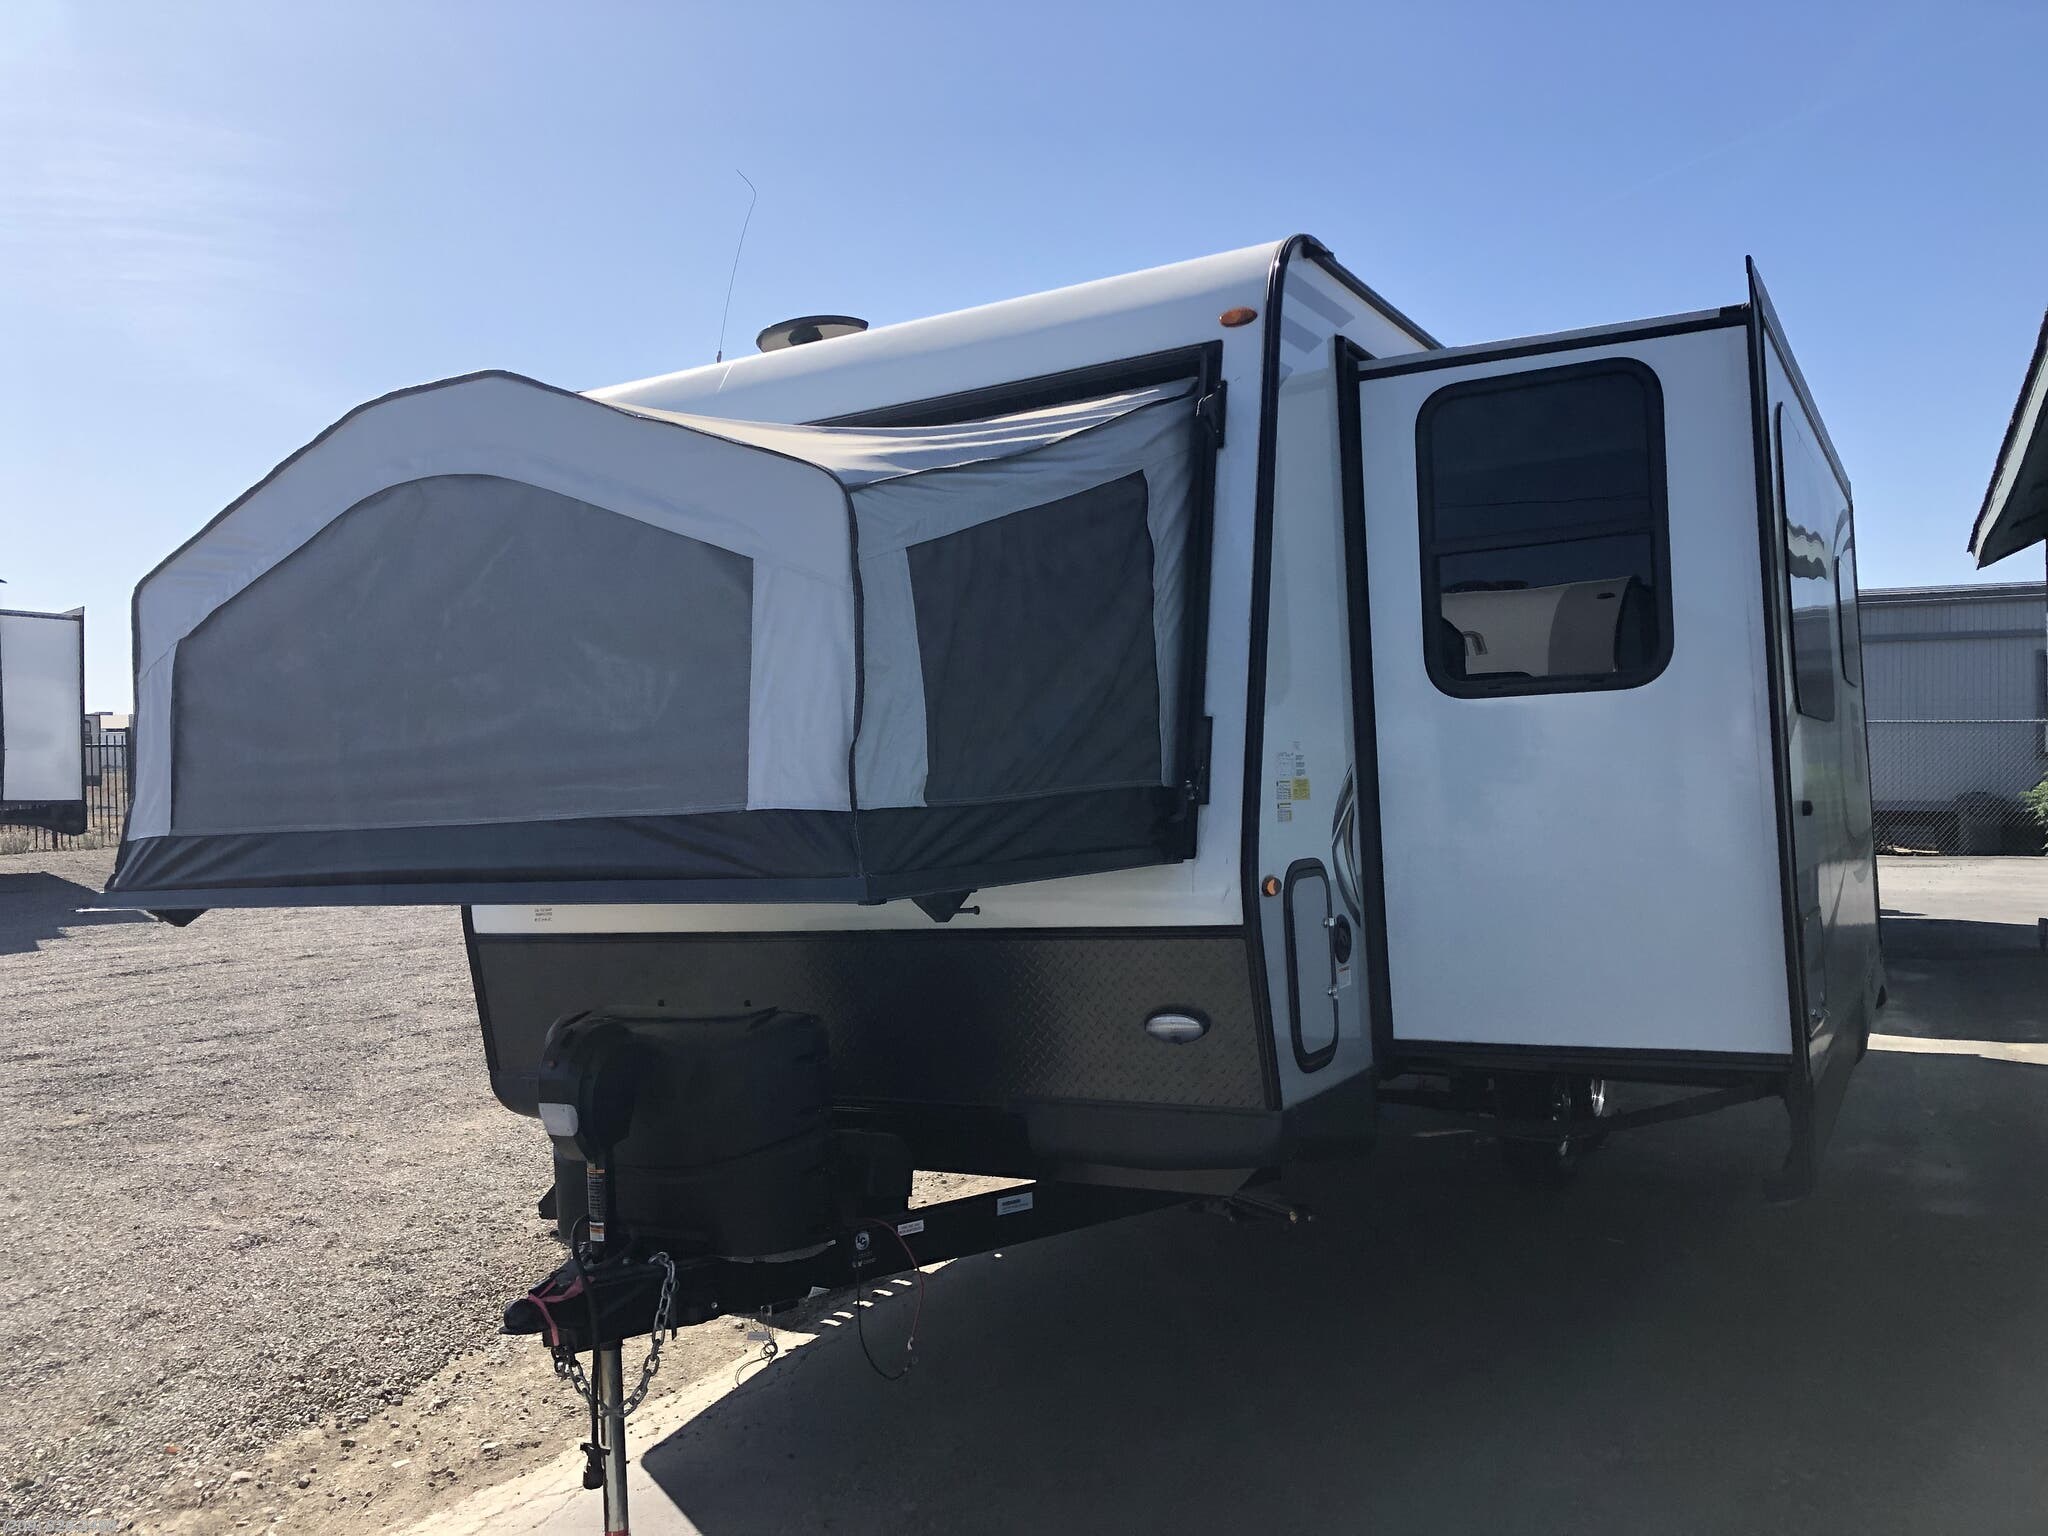 2020 Forest River Rockwood Roo 21SS RV for Sale in Los Banos, CA 93635 2020 Forest River Rockwood Roo 21ss